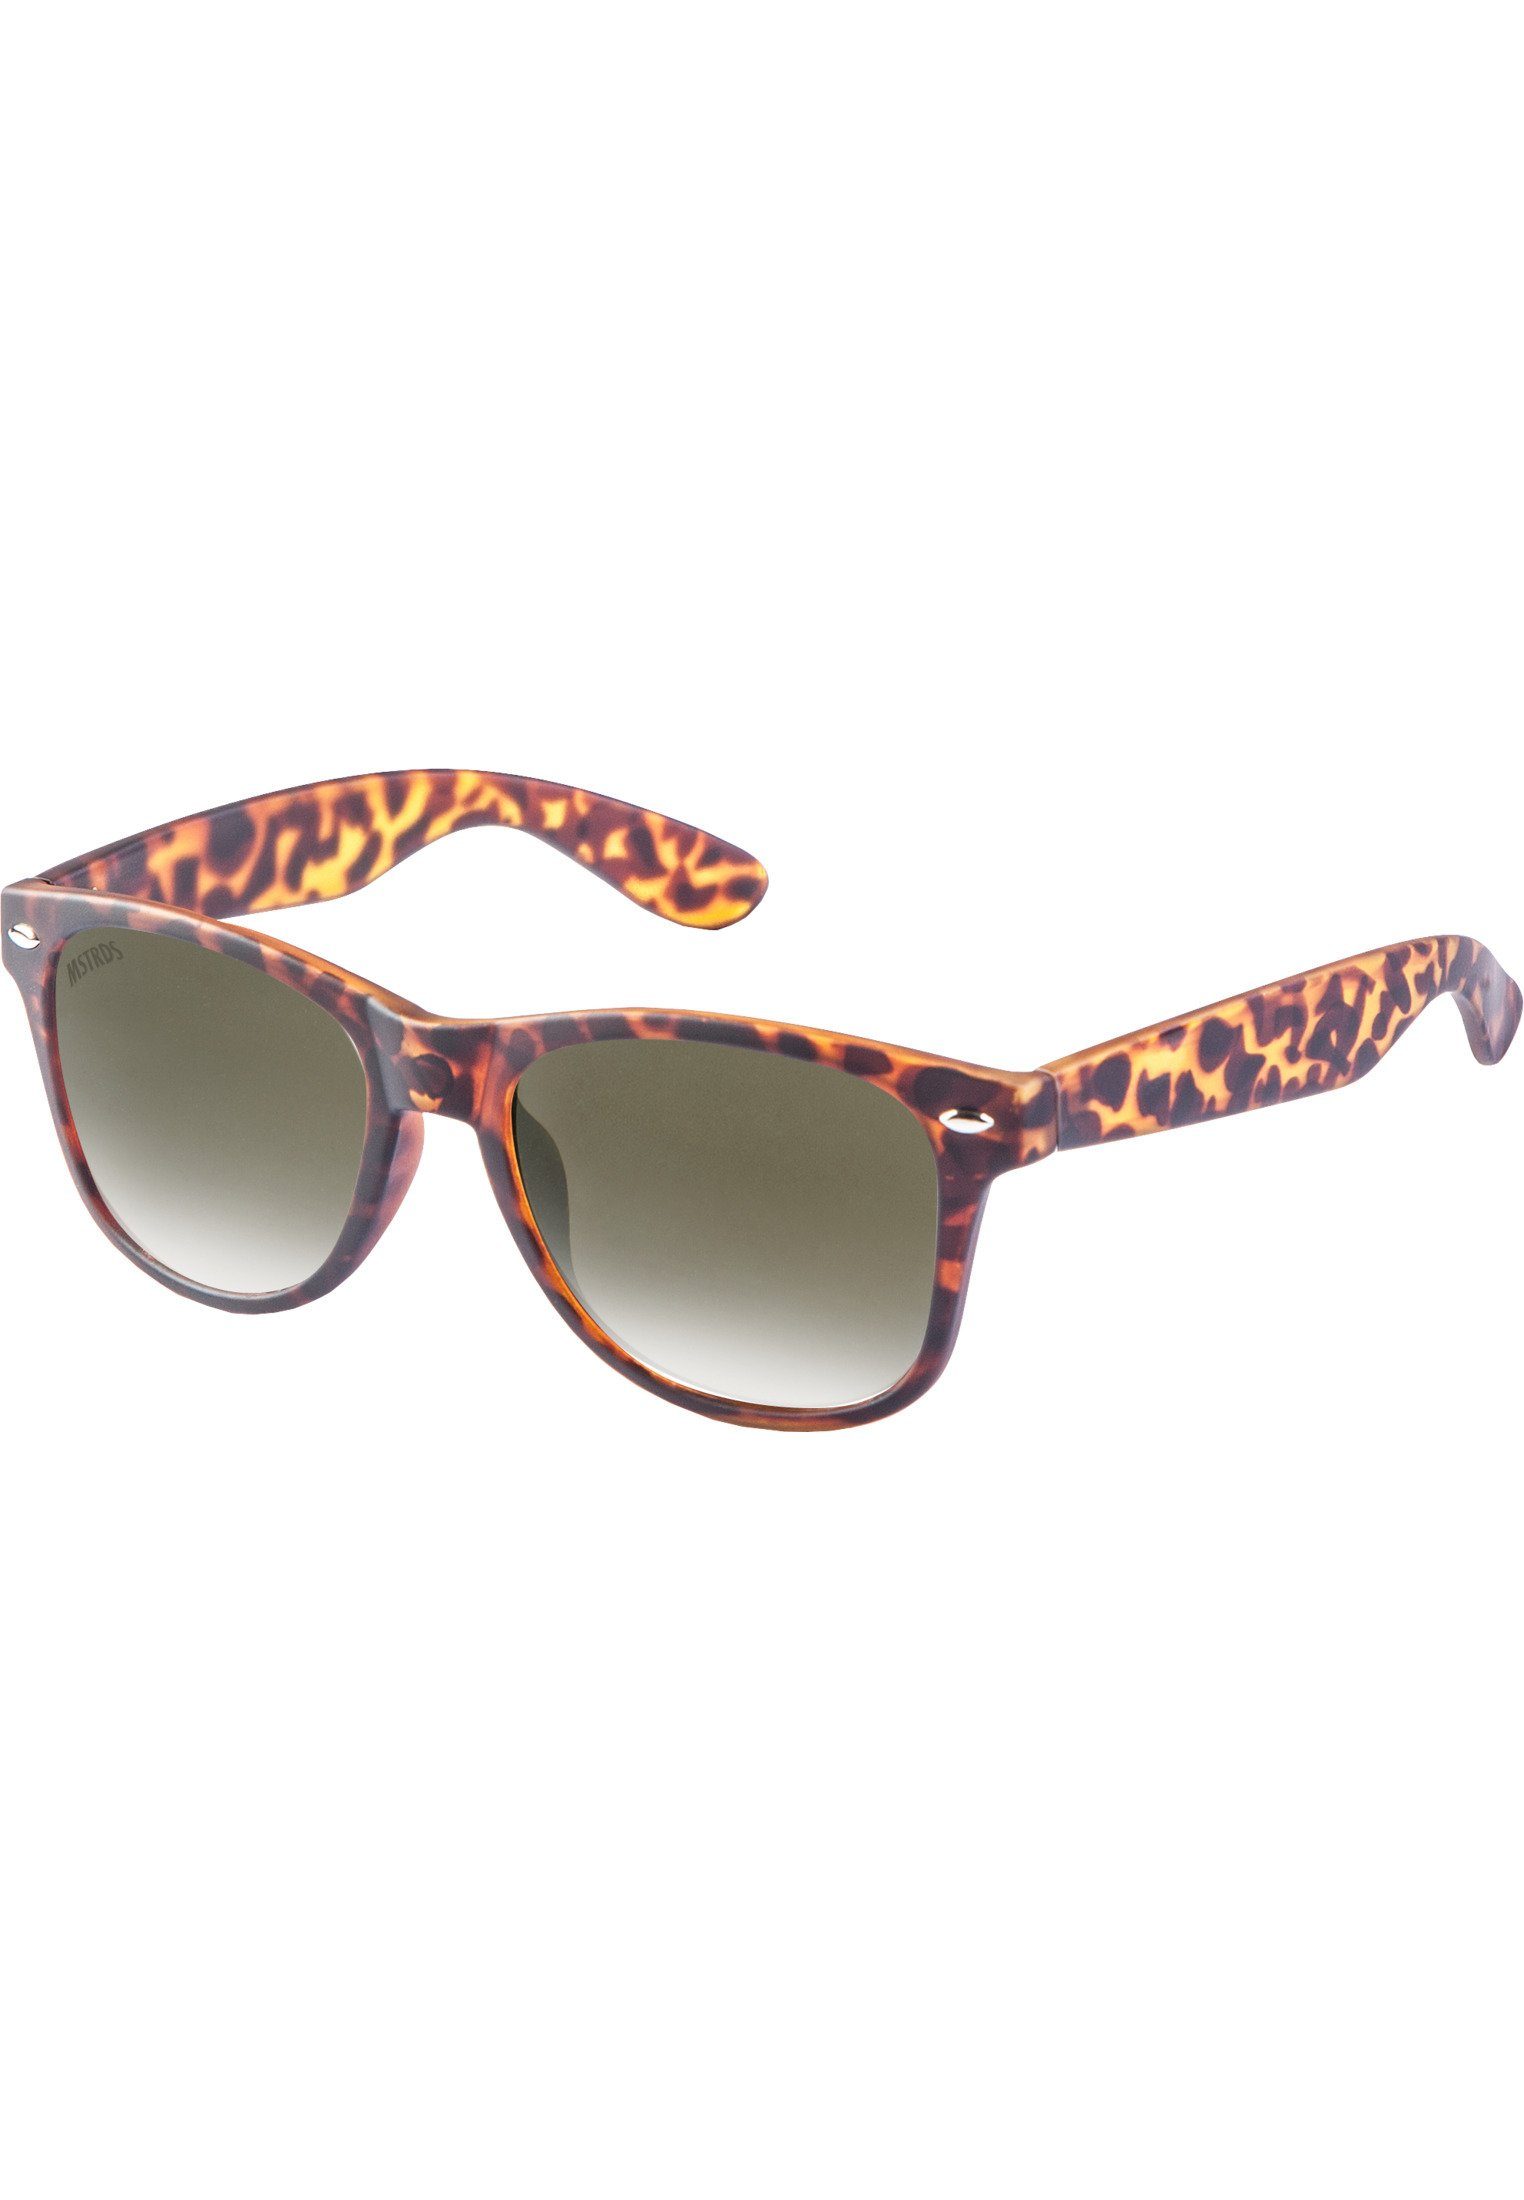 Youth havanna/brown Sonnenbrille MSTRDS Accessoires Likoma Sunglasses